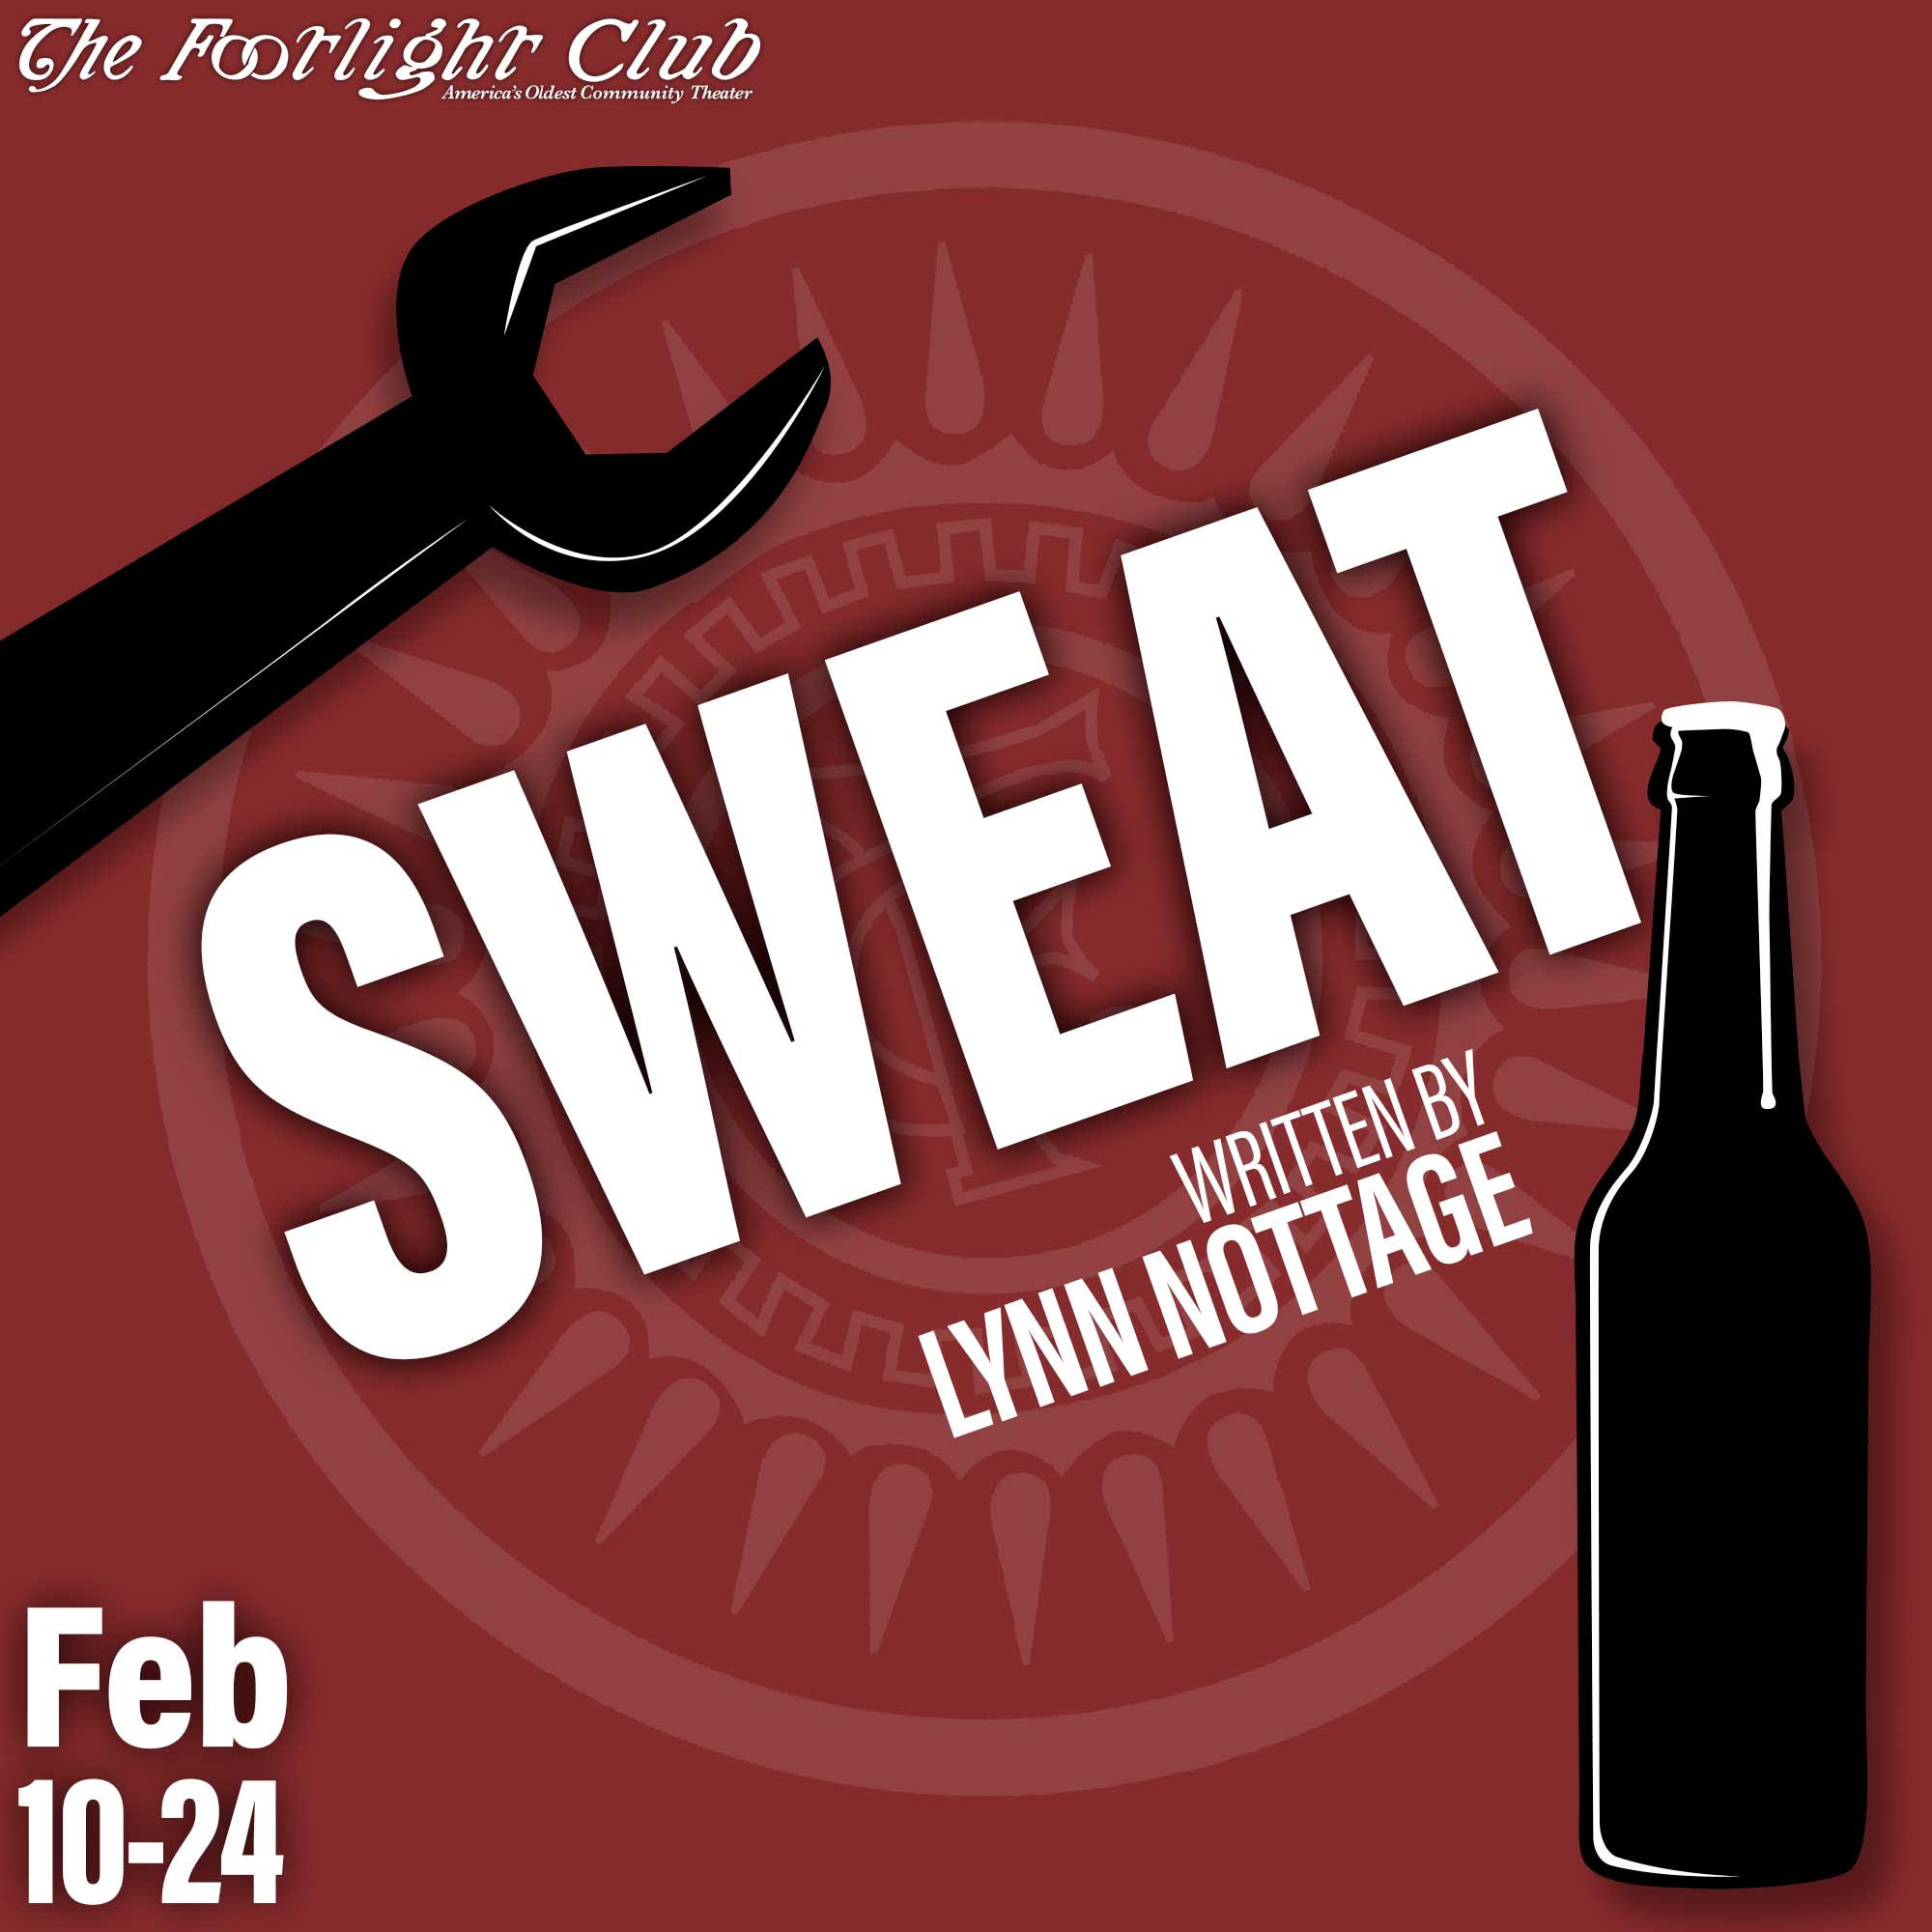 Audition Notice: Sweat by Lynn Nottage at the Footlight Club - The Bay ...